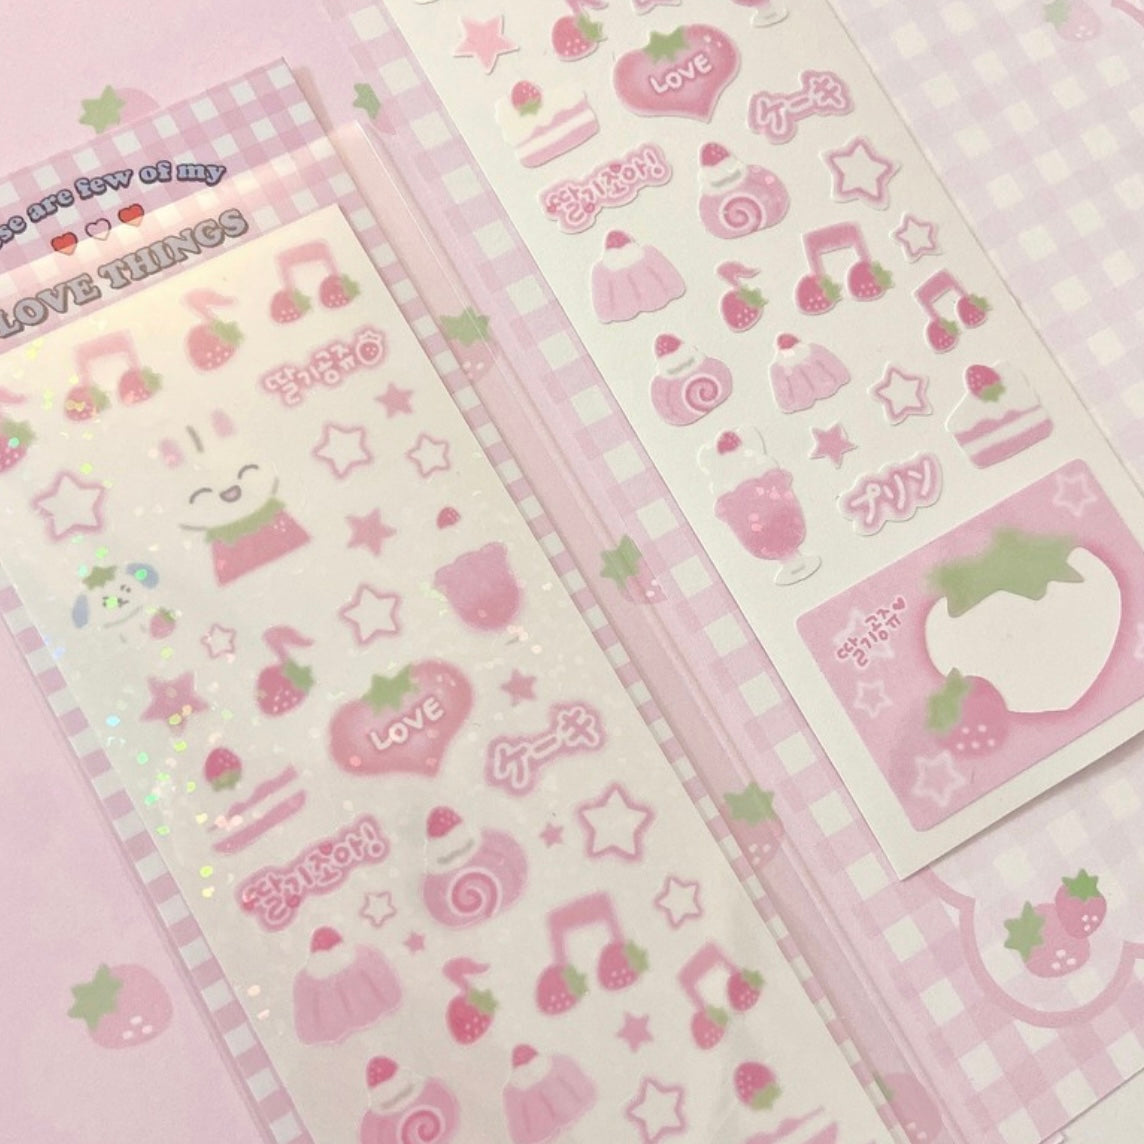 {love things} strawberry party sticker